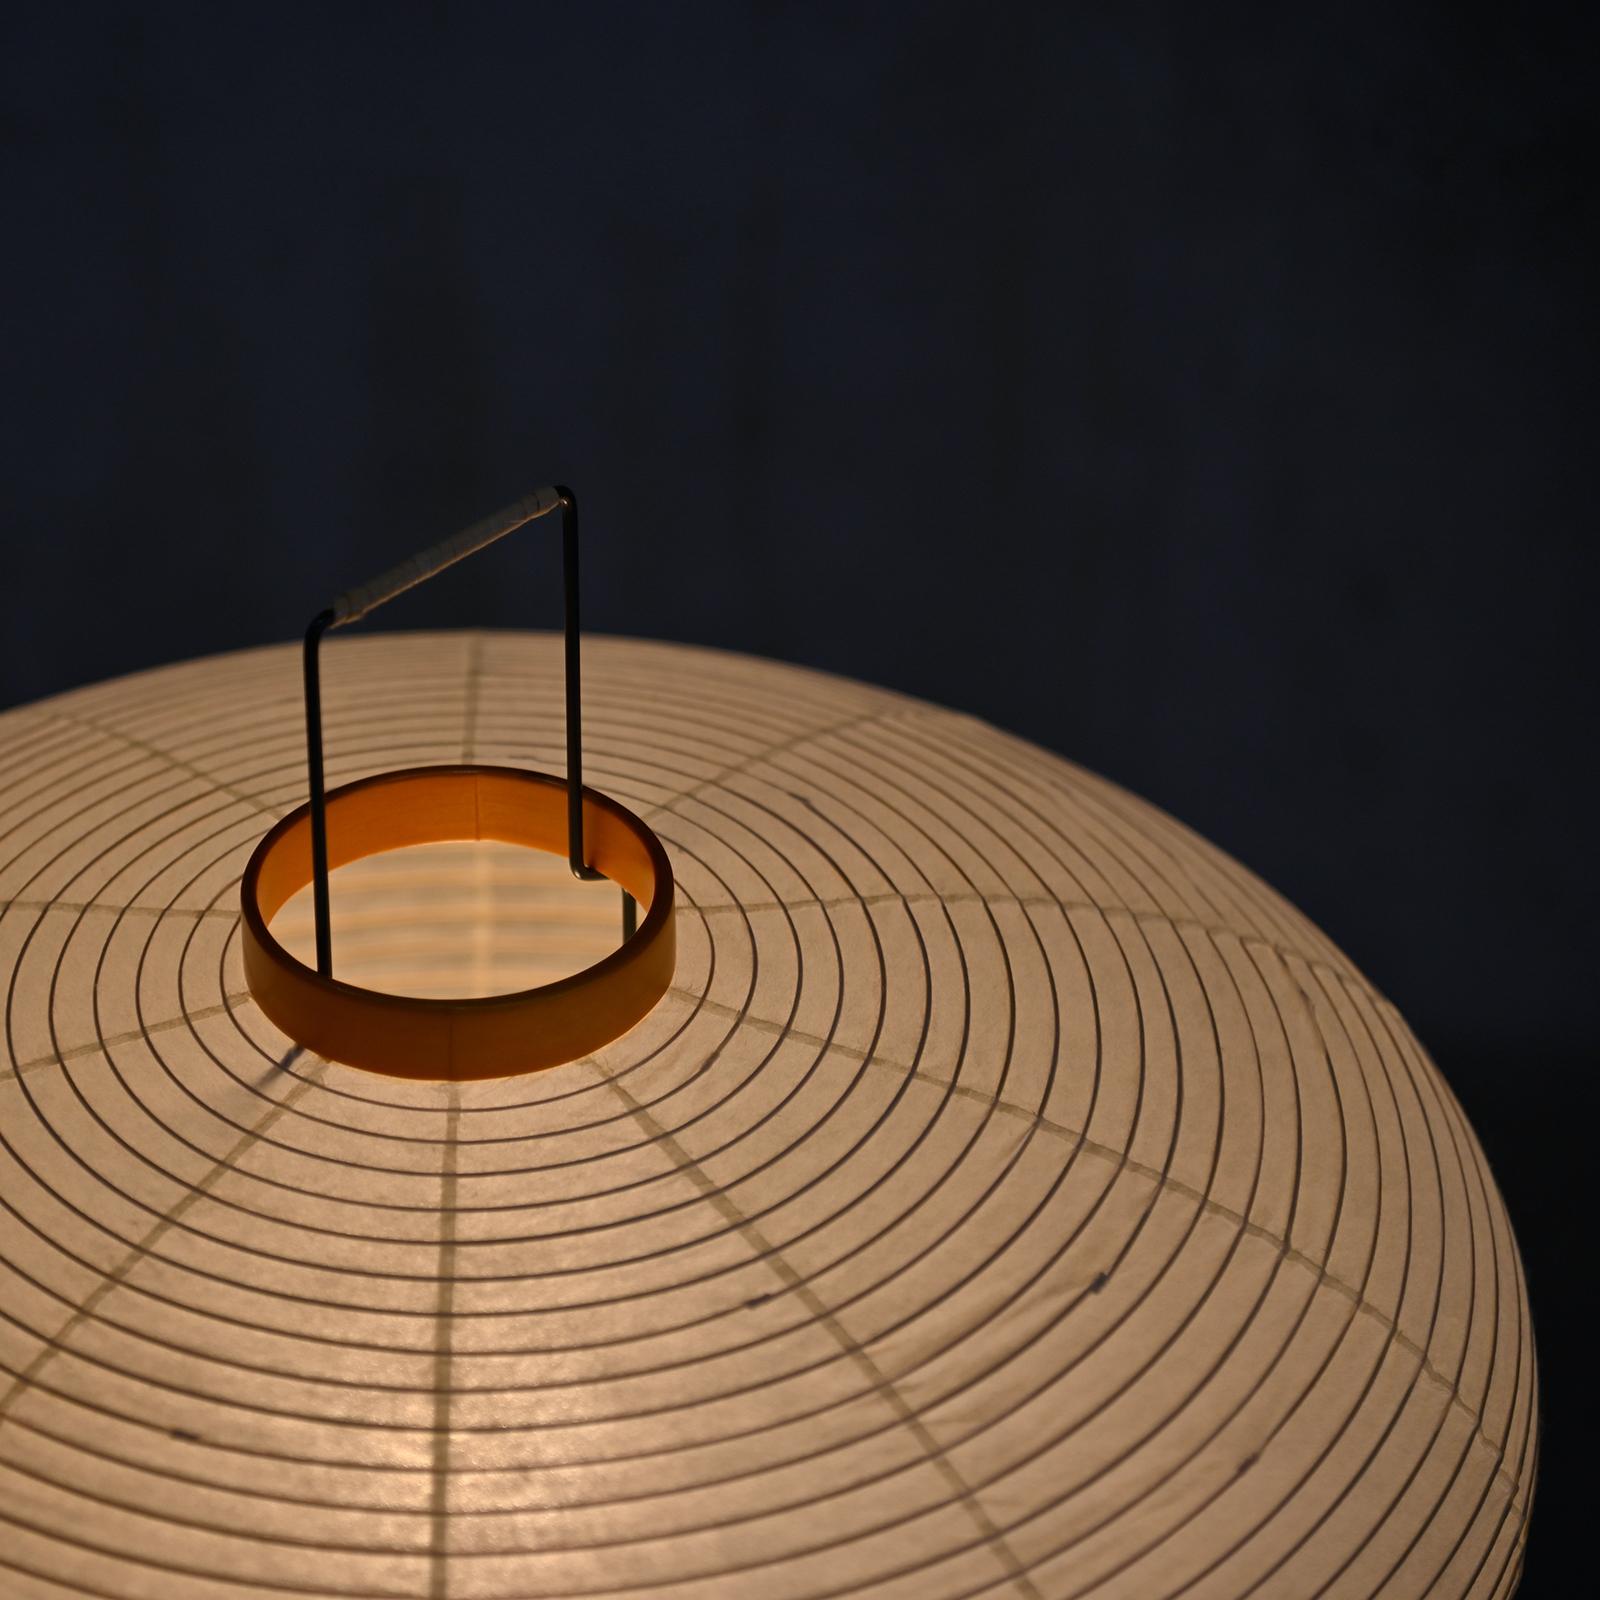 Mid-20th Century Isamu Noguchi Model 9A Akari Light Sculpture Handcrafted by Ozeki, Japan For Sale